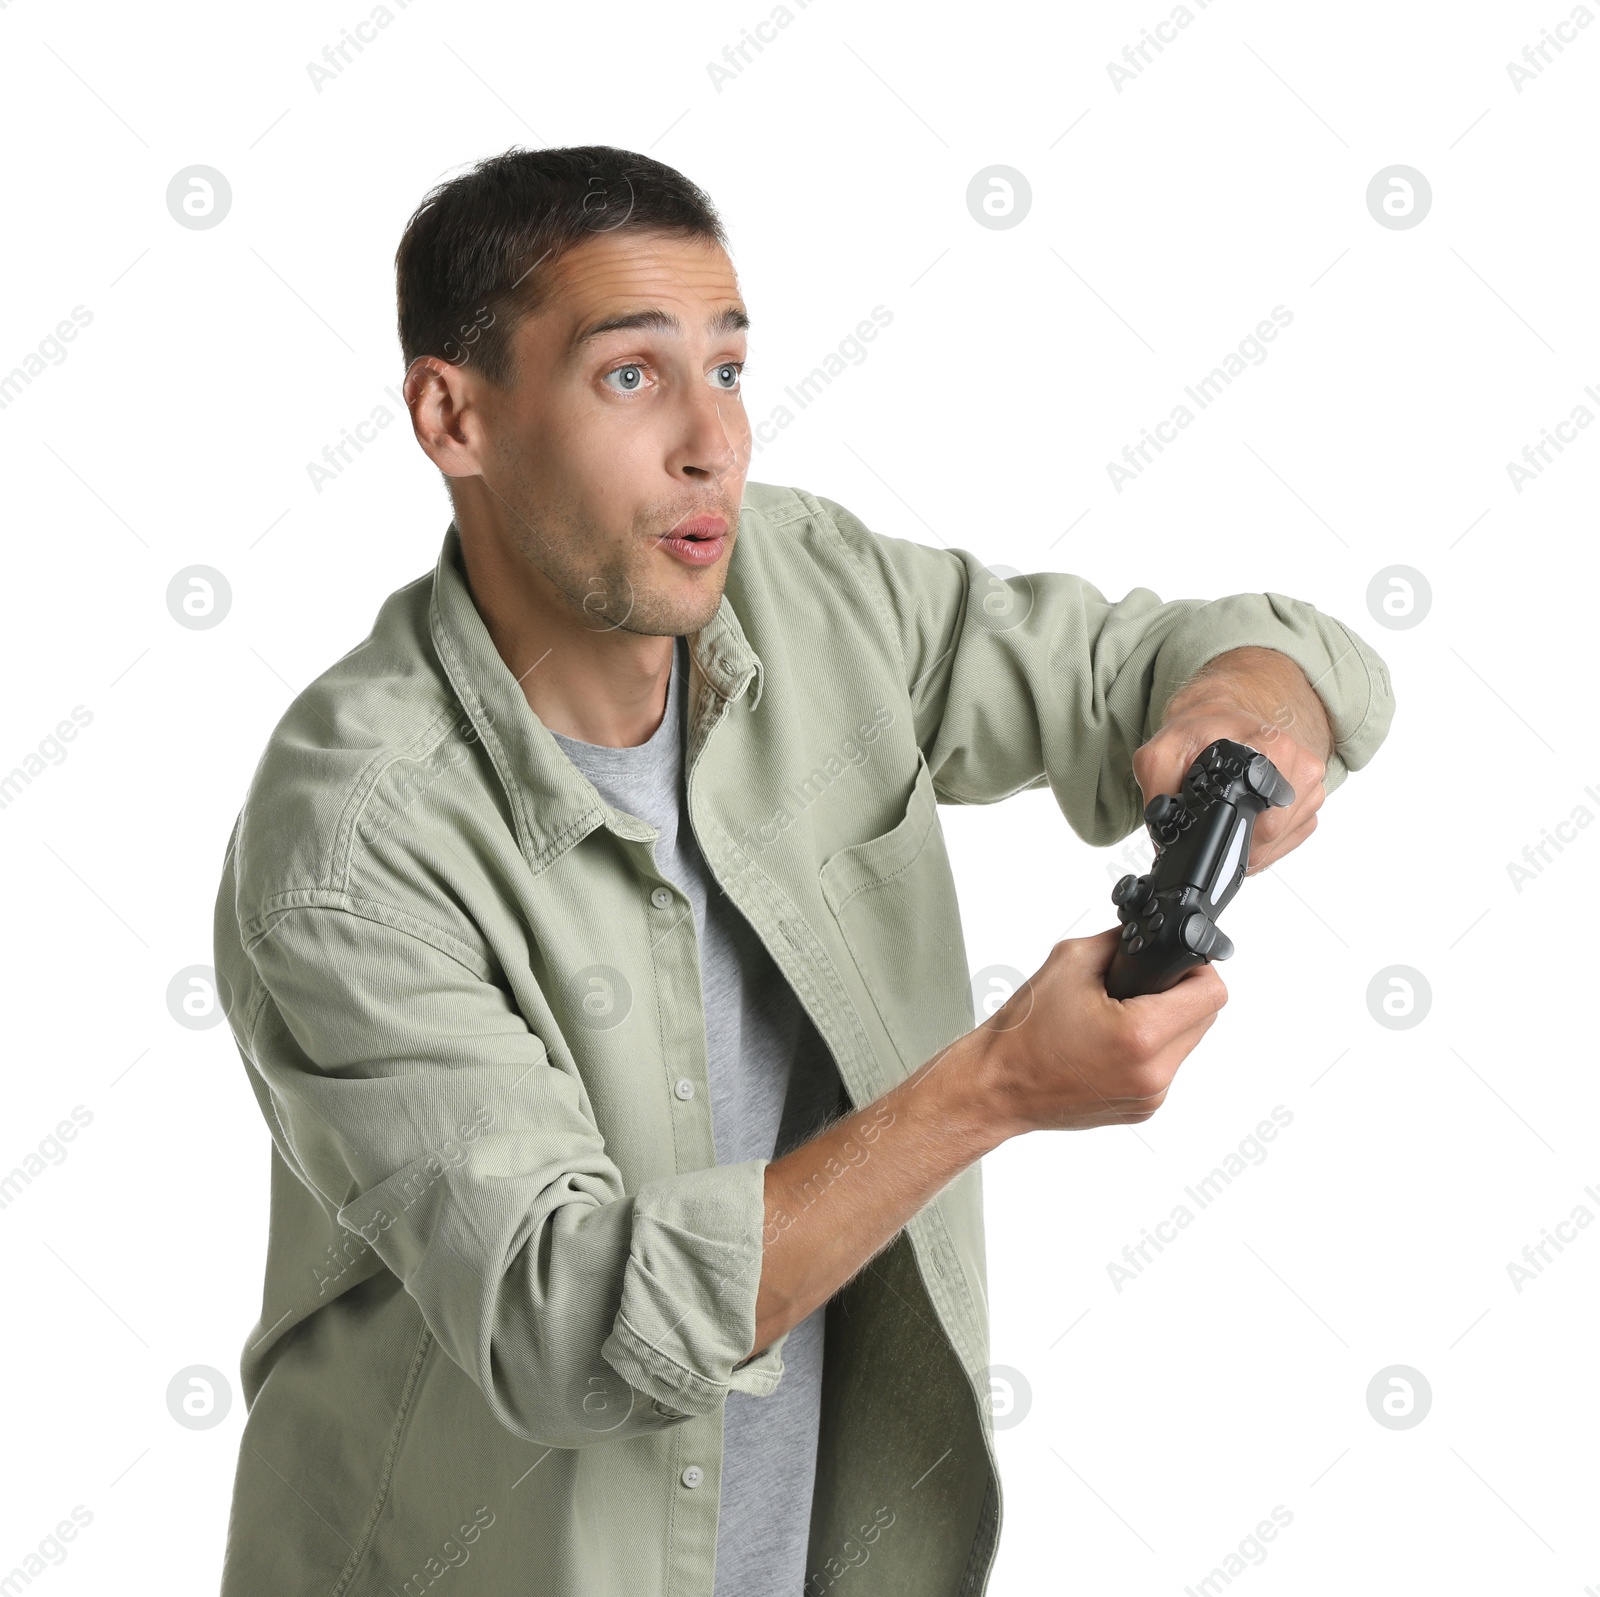 Photo of Man playing video games with controller on white background